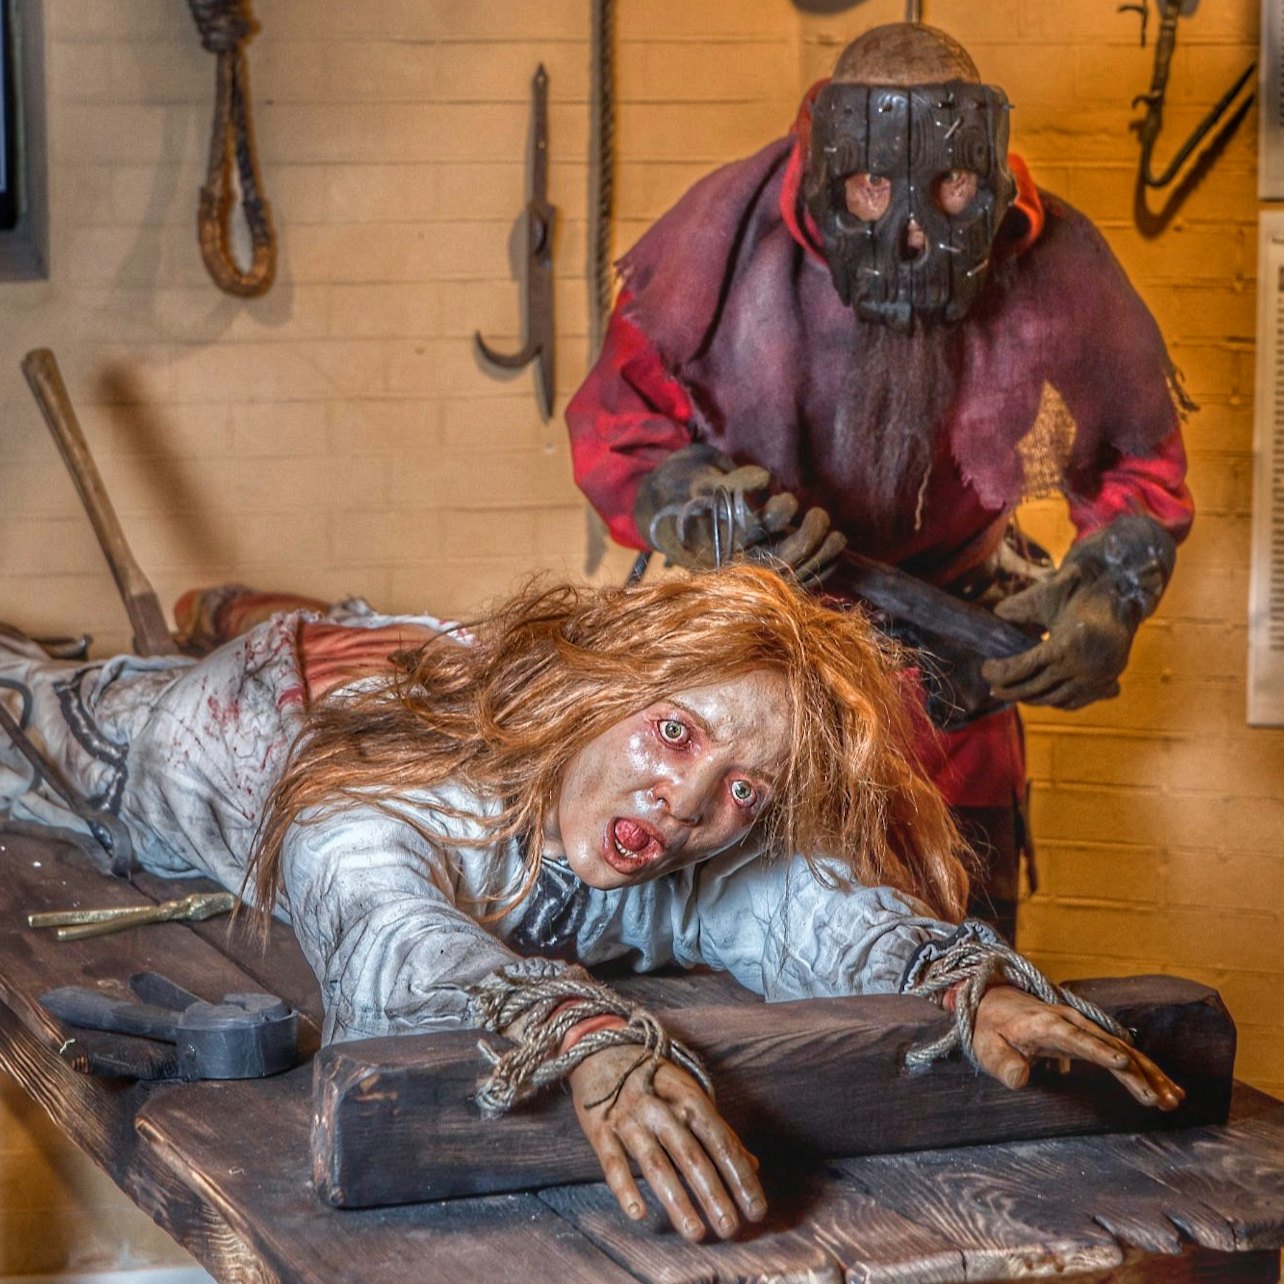 Medieval Torture Museum with Ghost Hunting - Accommodations in Los Angeles